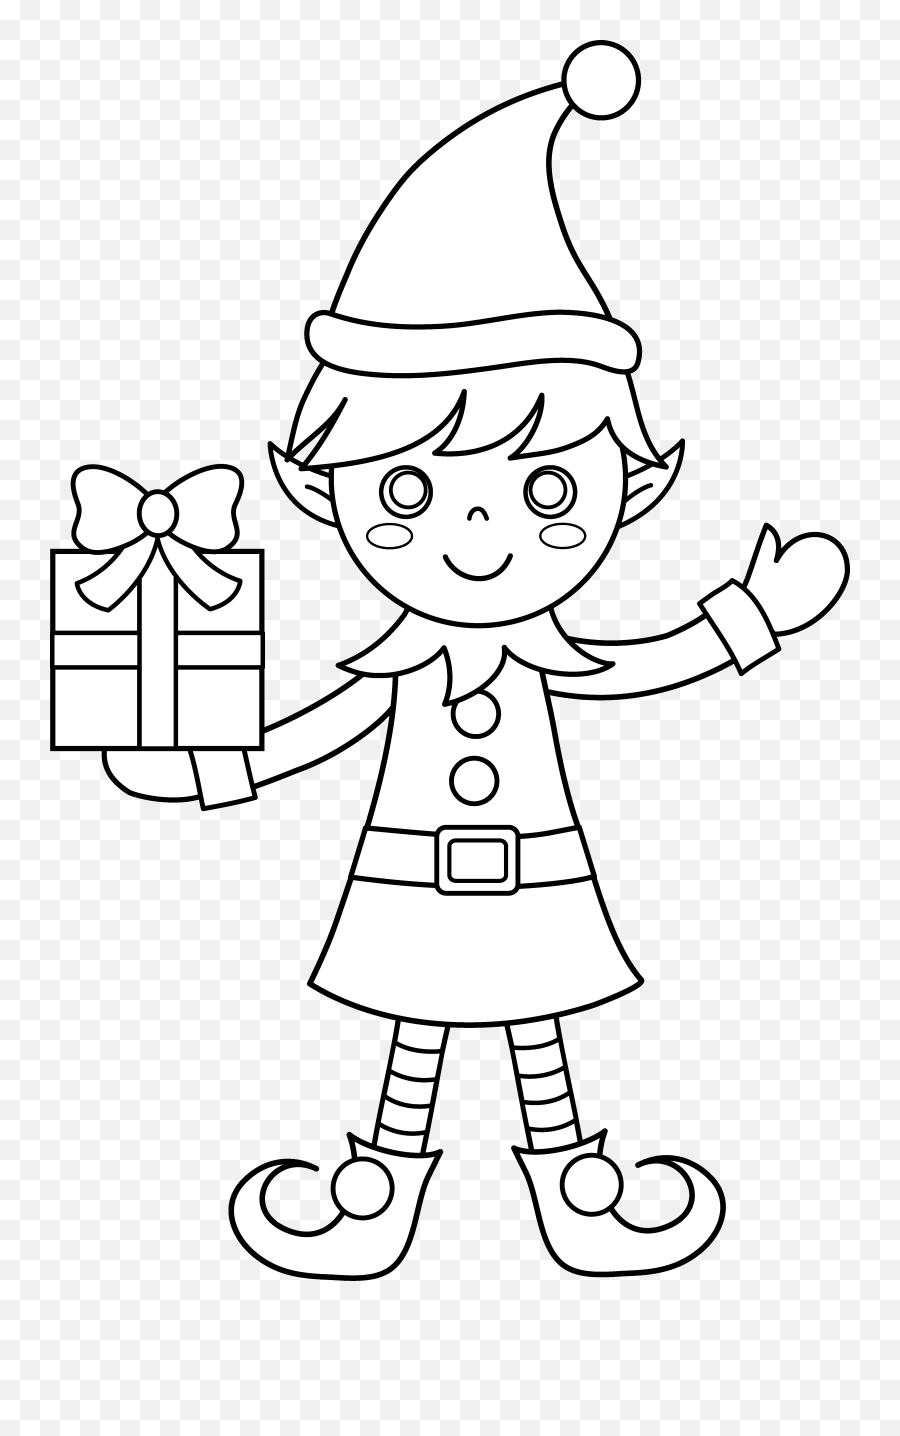 Elf Black And White Elf Clipart Black - Christmas Elf Coloring Pages Emoji,Elf Clipart